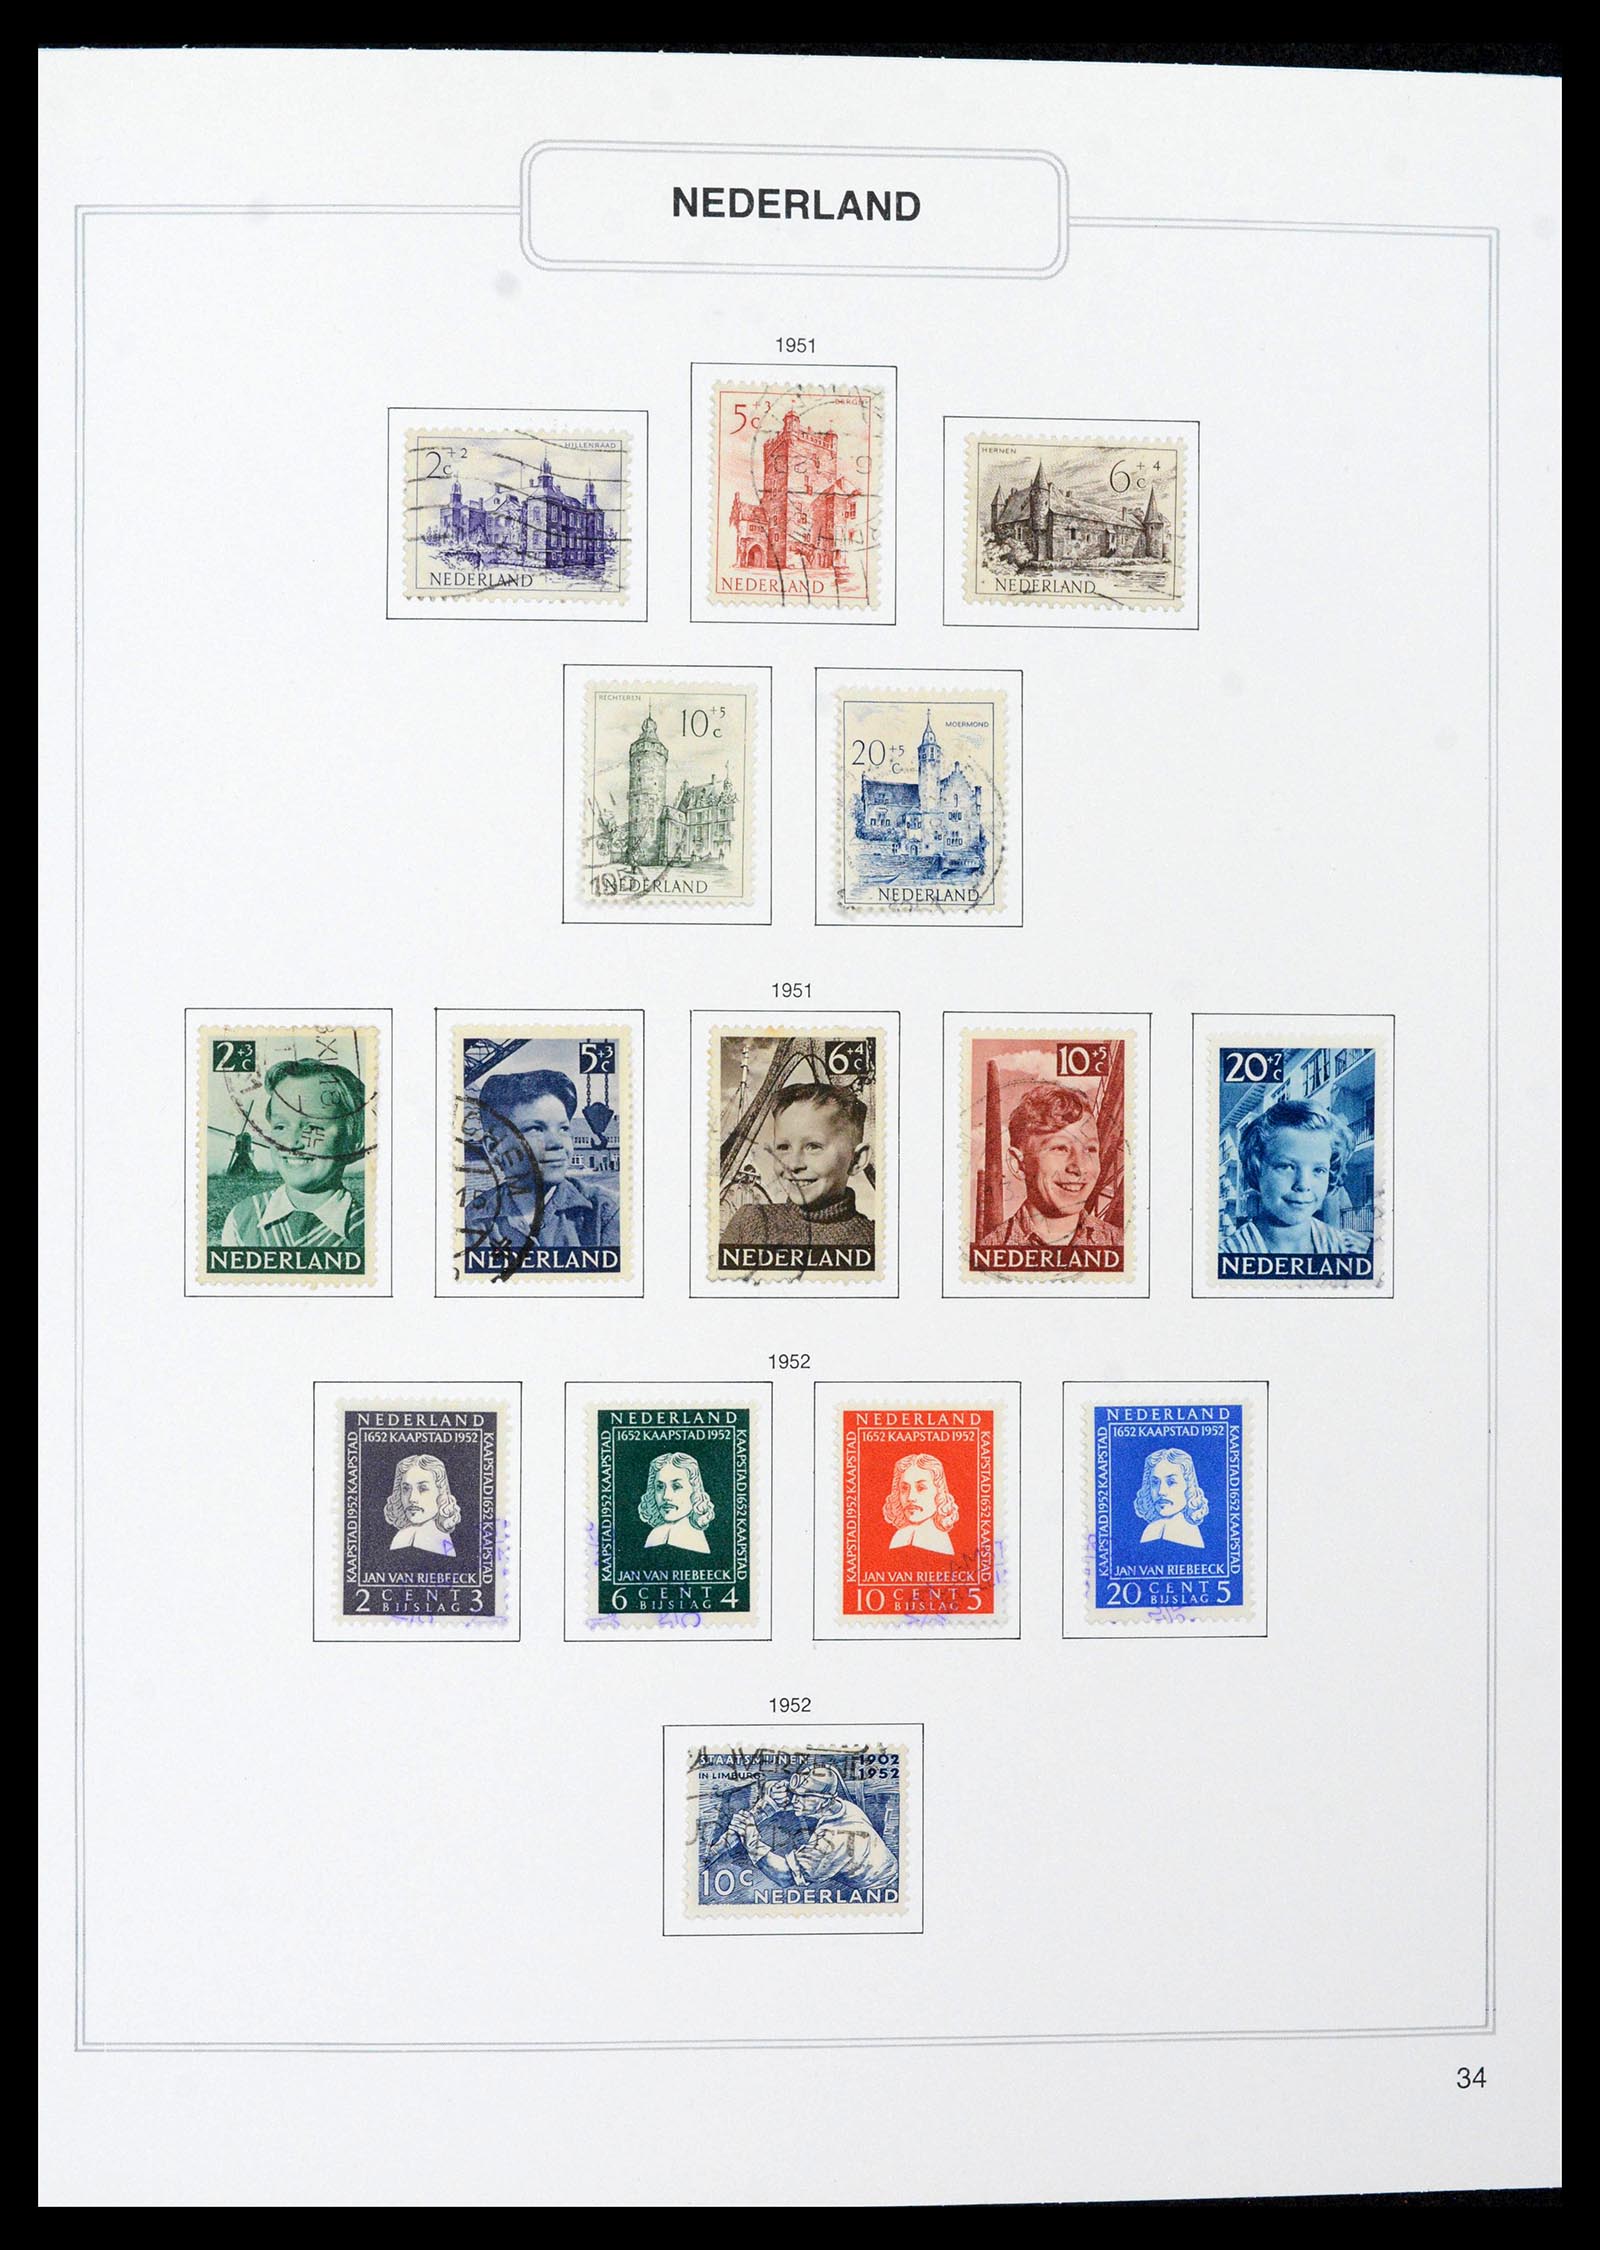 39261 0034 - Stamp collection 39261 Netherlands 1852-2015.